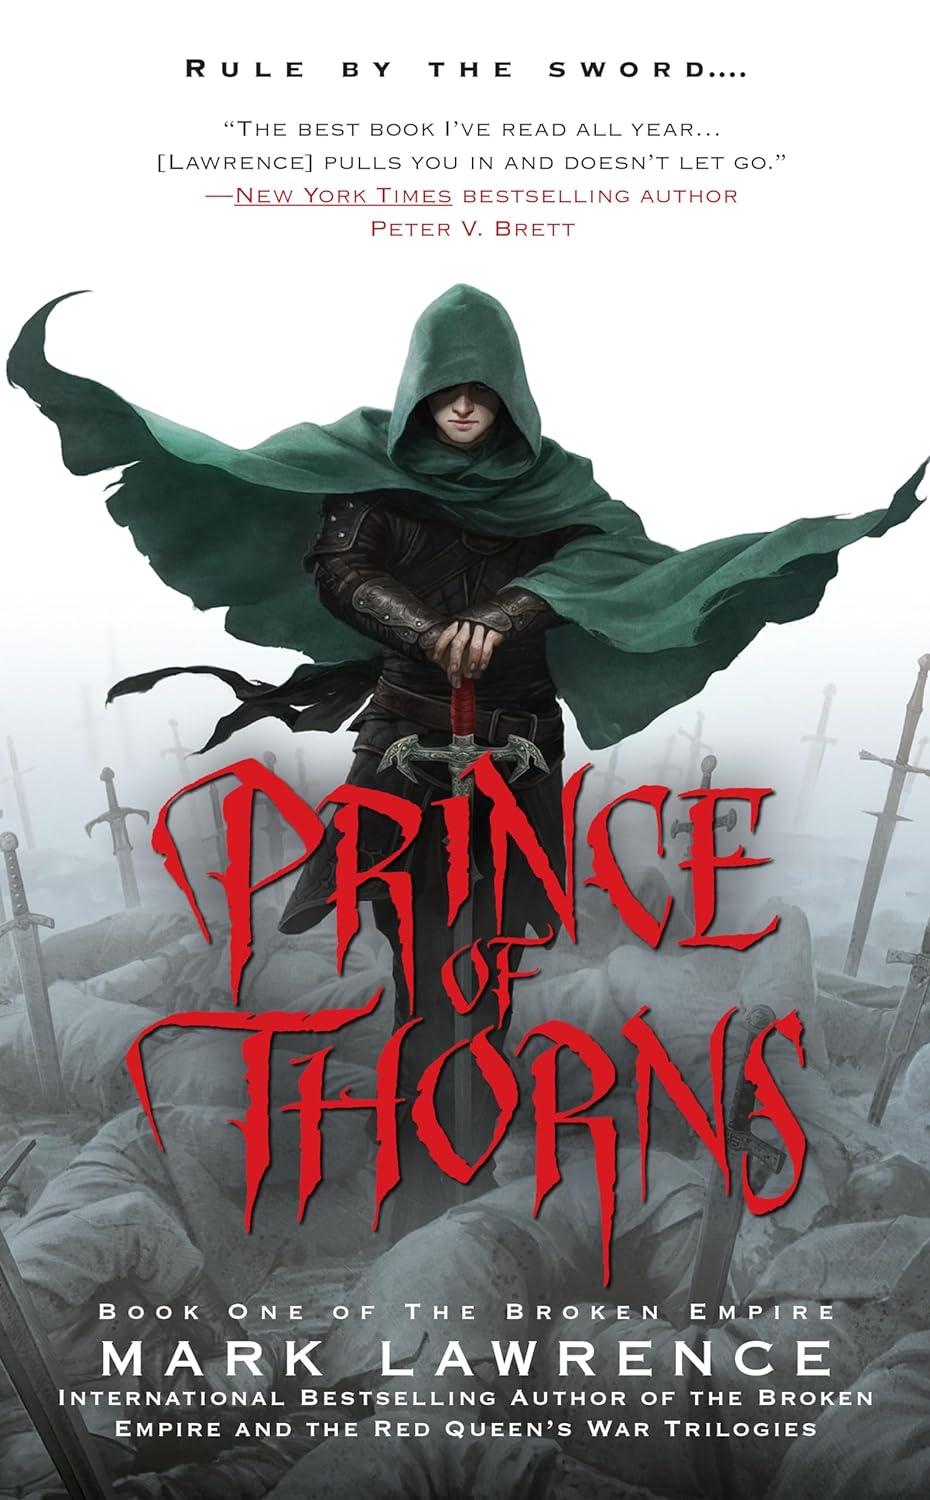 Prince of Thorns (The Broken Empire Series), by Mark Lawrence